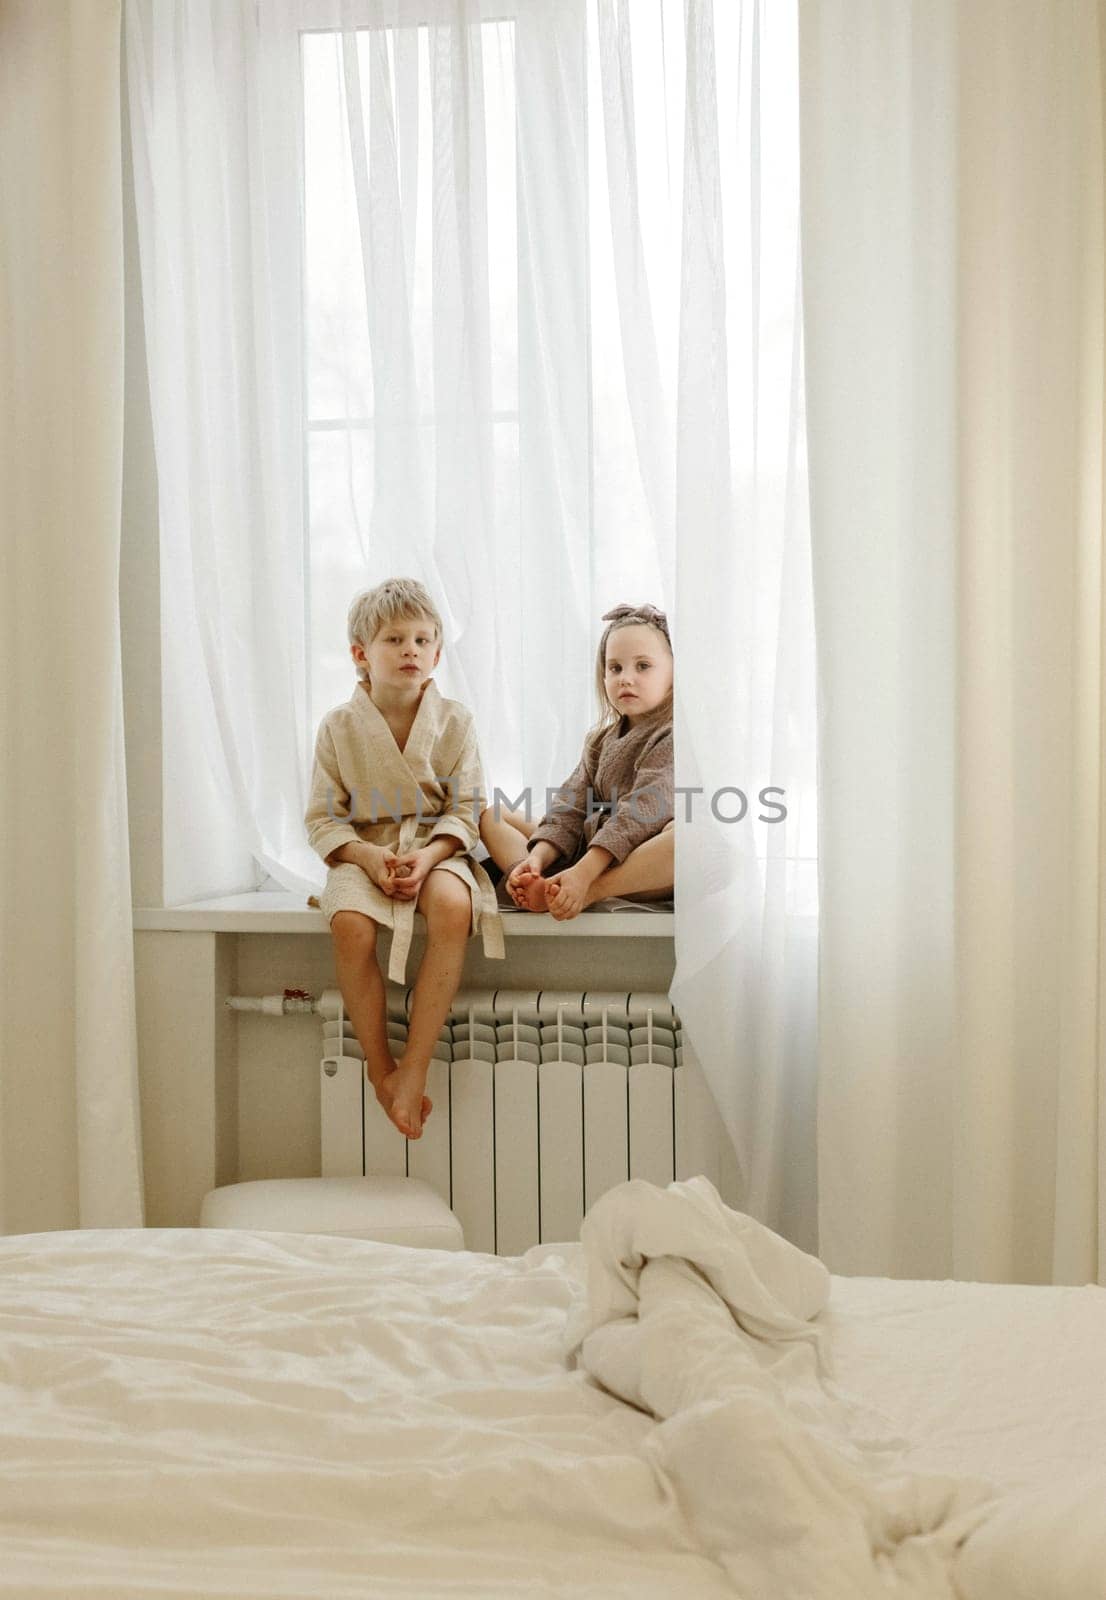 A boy and a girl in bathrobes are sitting on the windowsill, talking, playing.